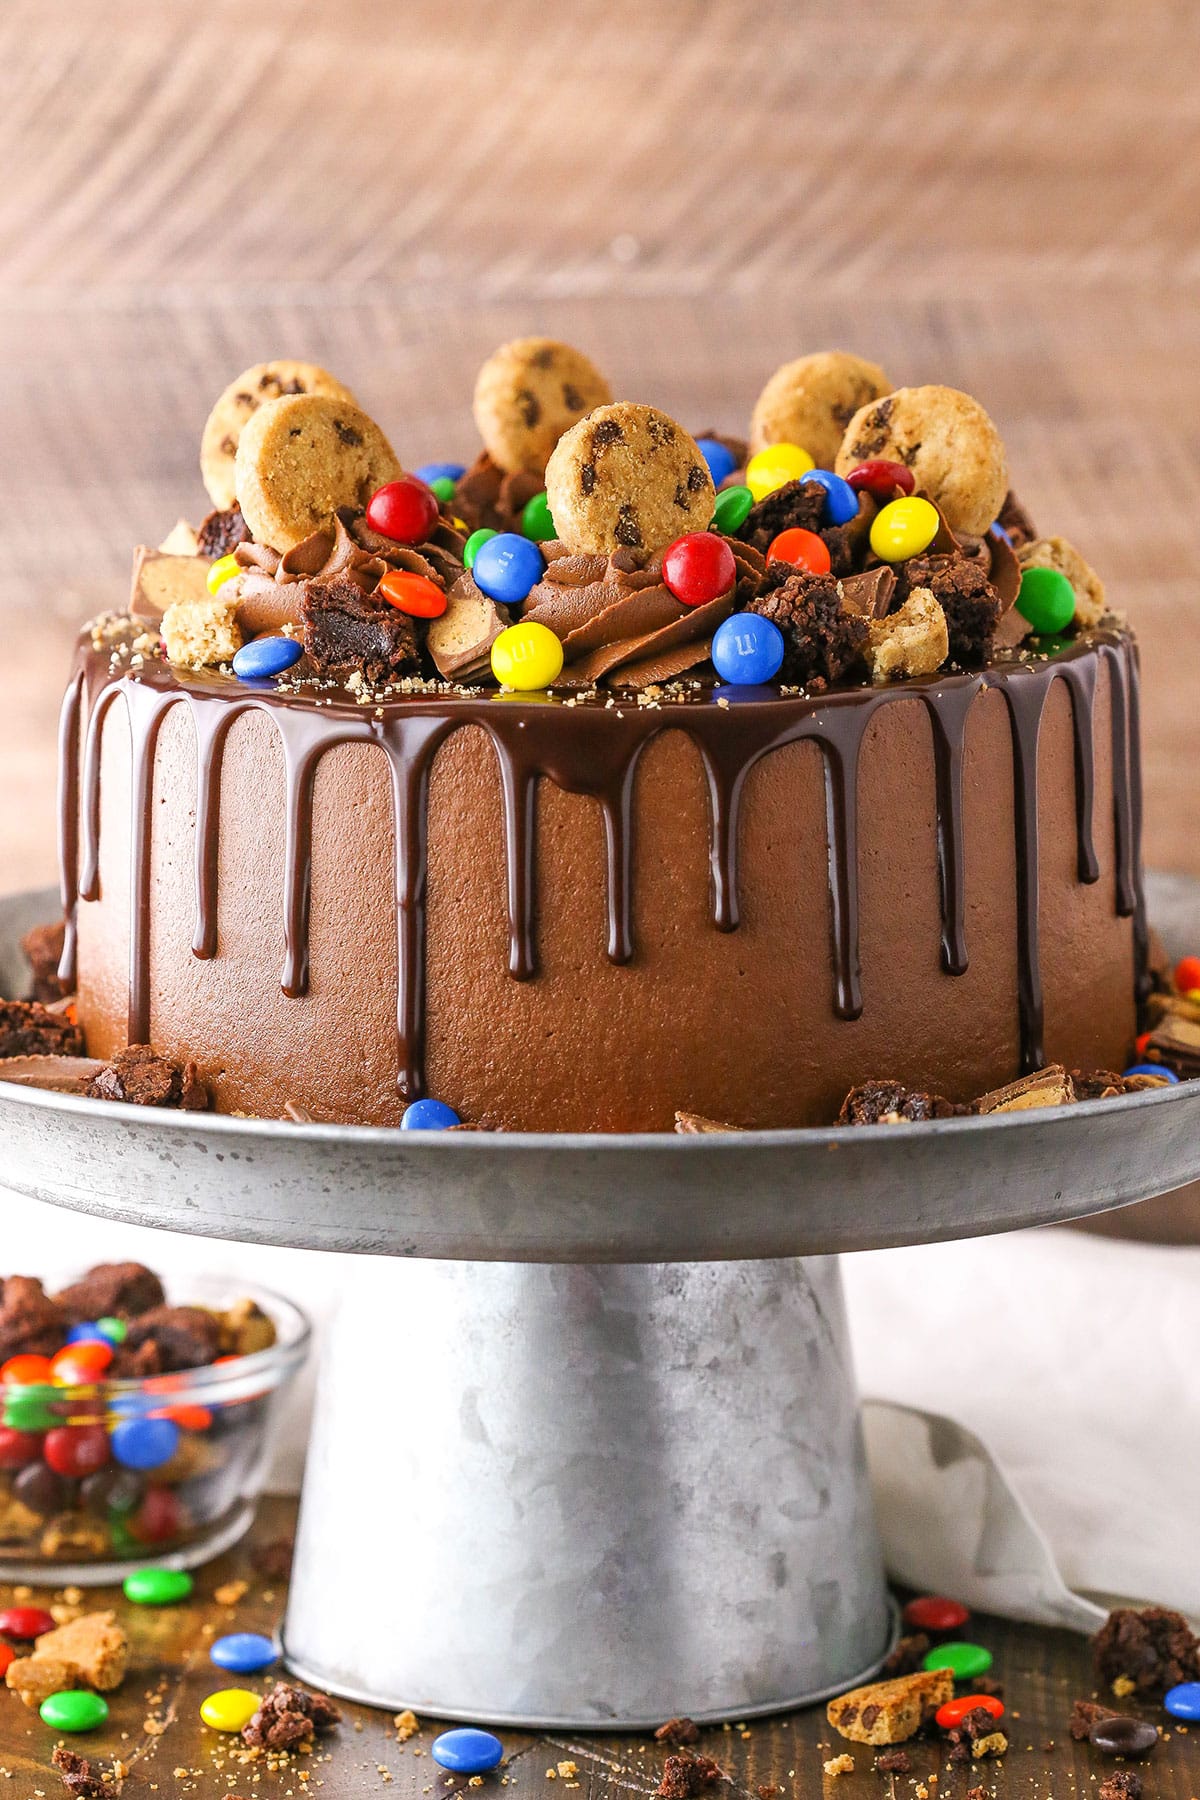 Halloween Cake Recipe: How to Make a Gravity-Defying M&M'S Cake – SheKnows